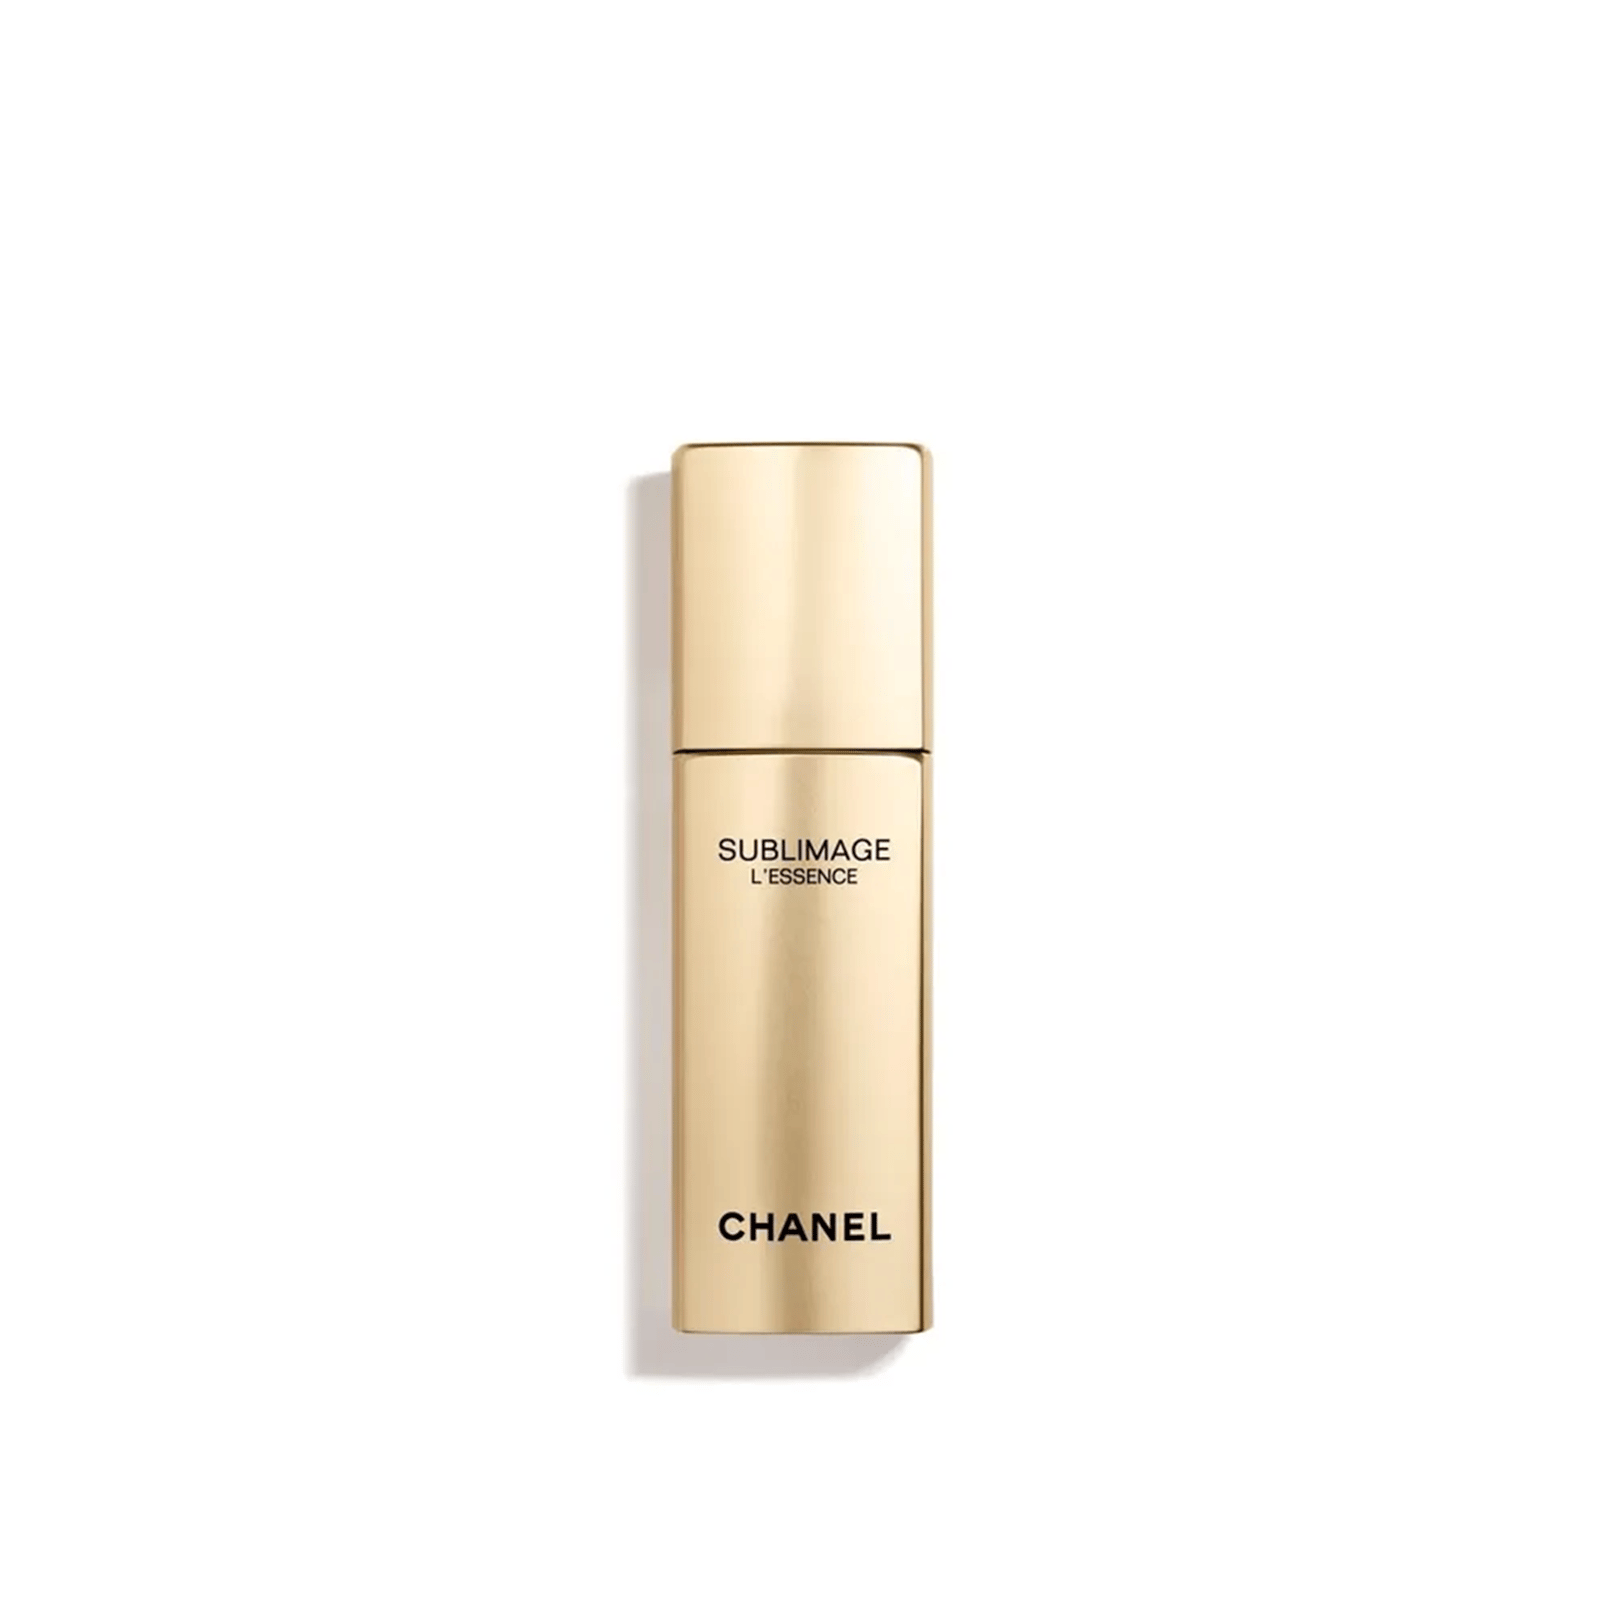 CHANEL Sublimage L'Essence Ultimate Revitalizing And Light-Activating Concentrate 30ml (1 fl oz)